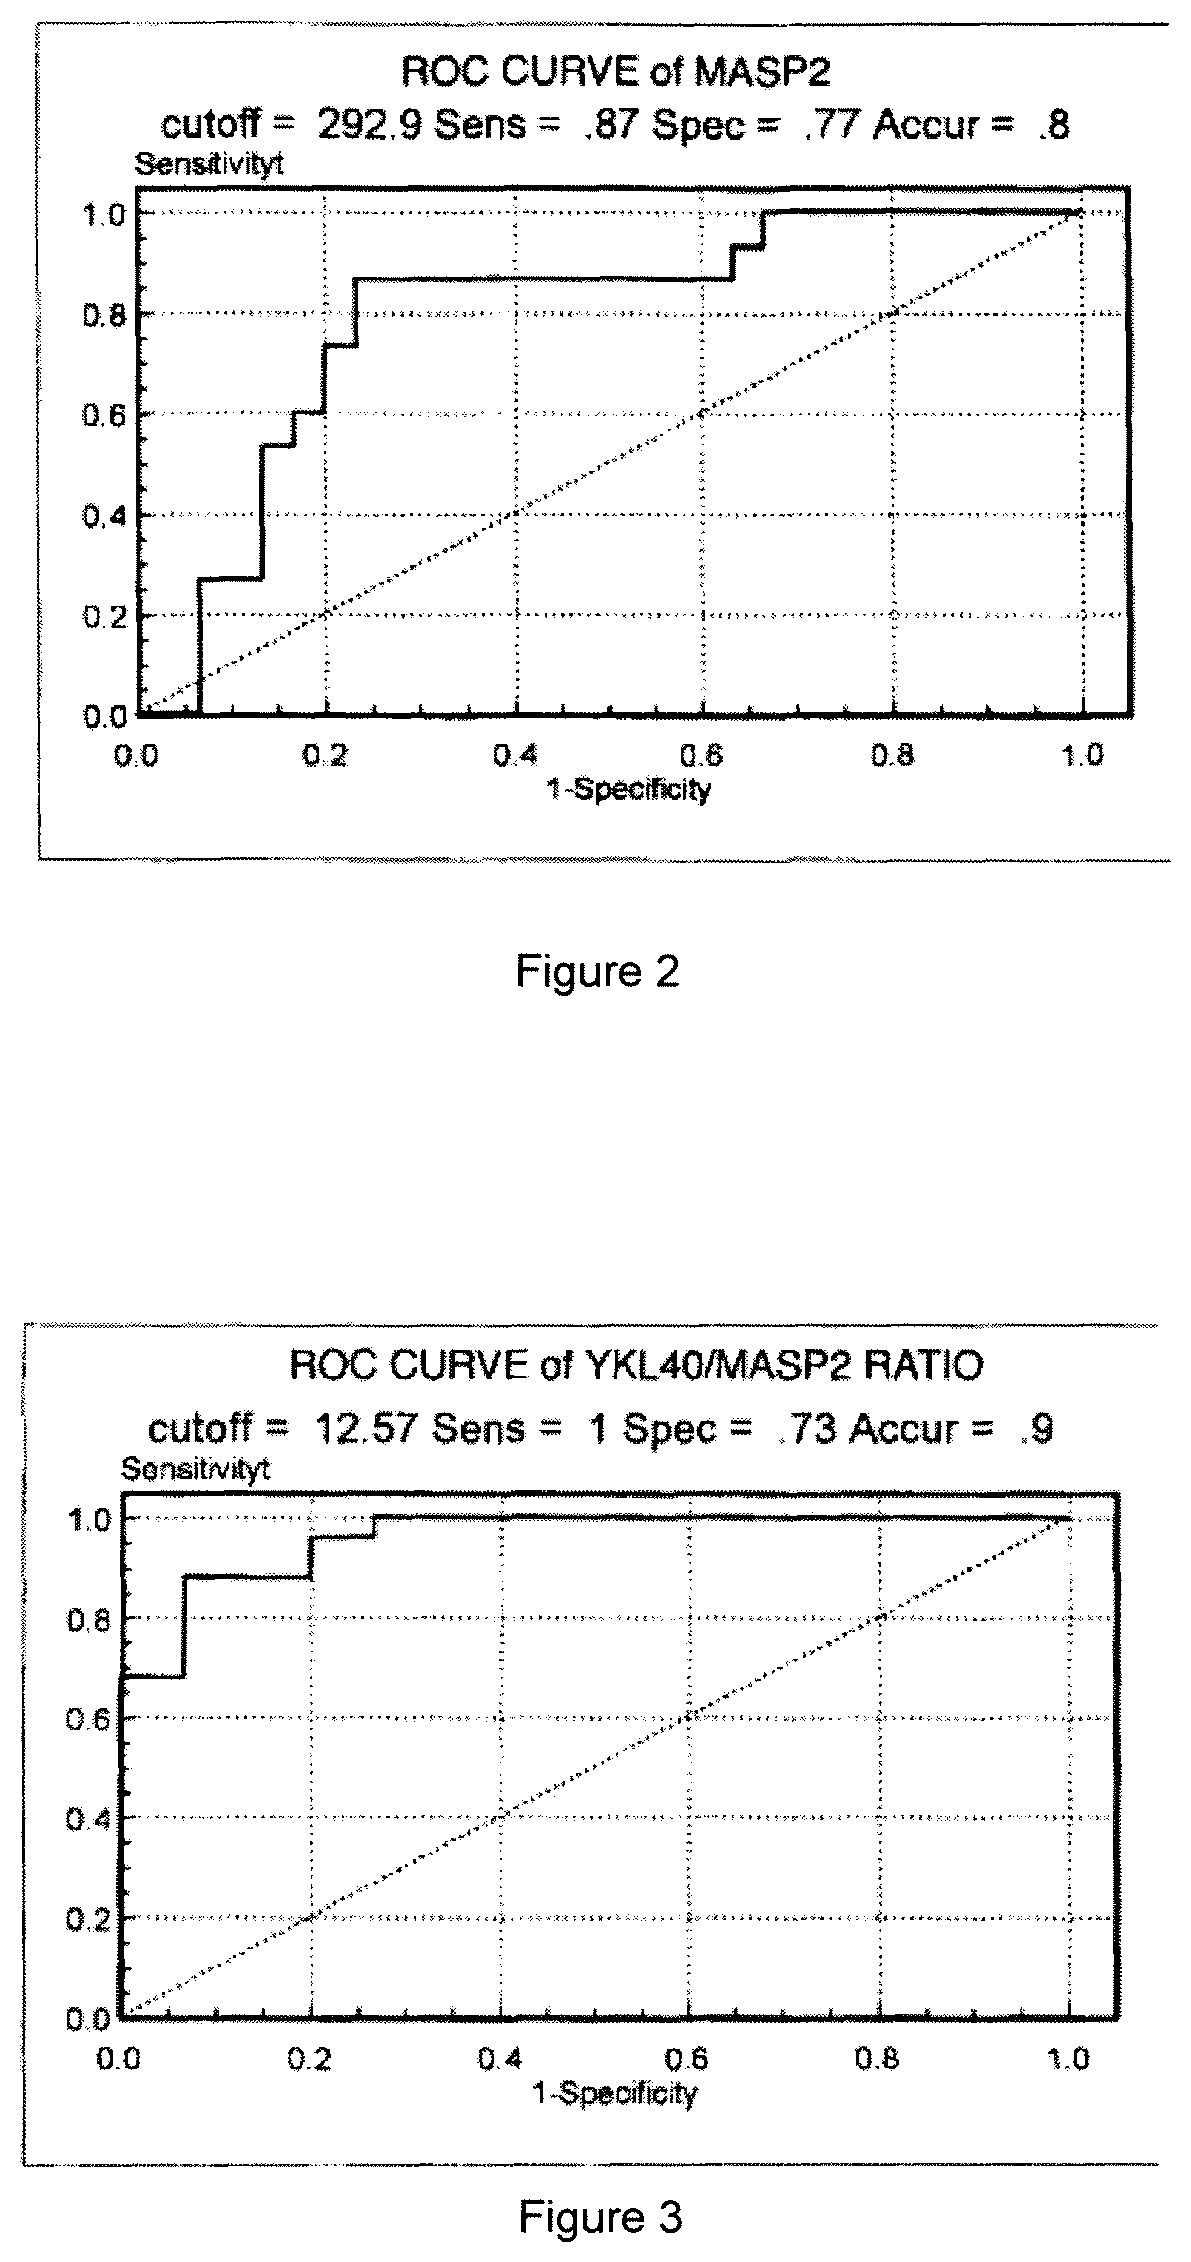 Sample hepatocarcinoma classification with YKL-40 to MASP2 concentration ratio